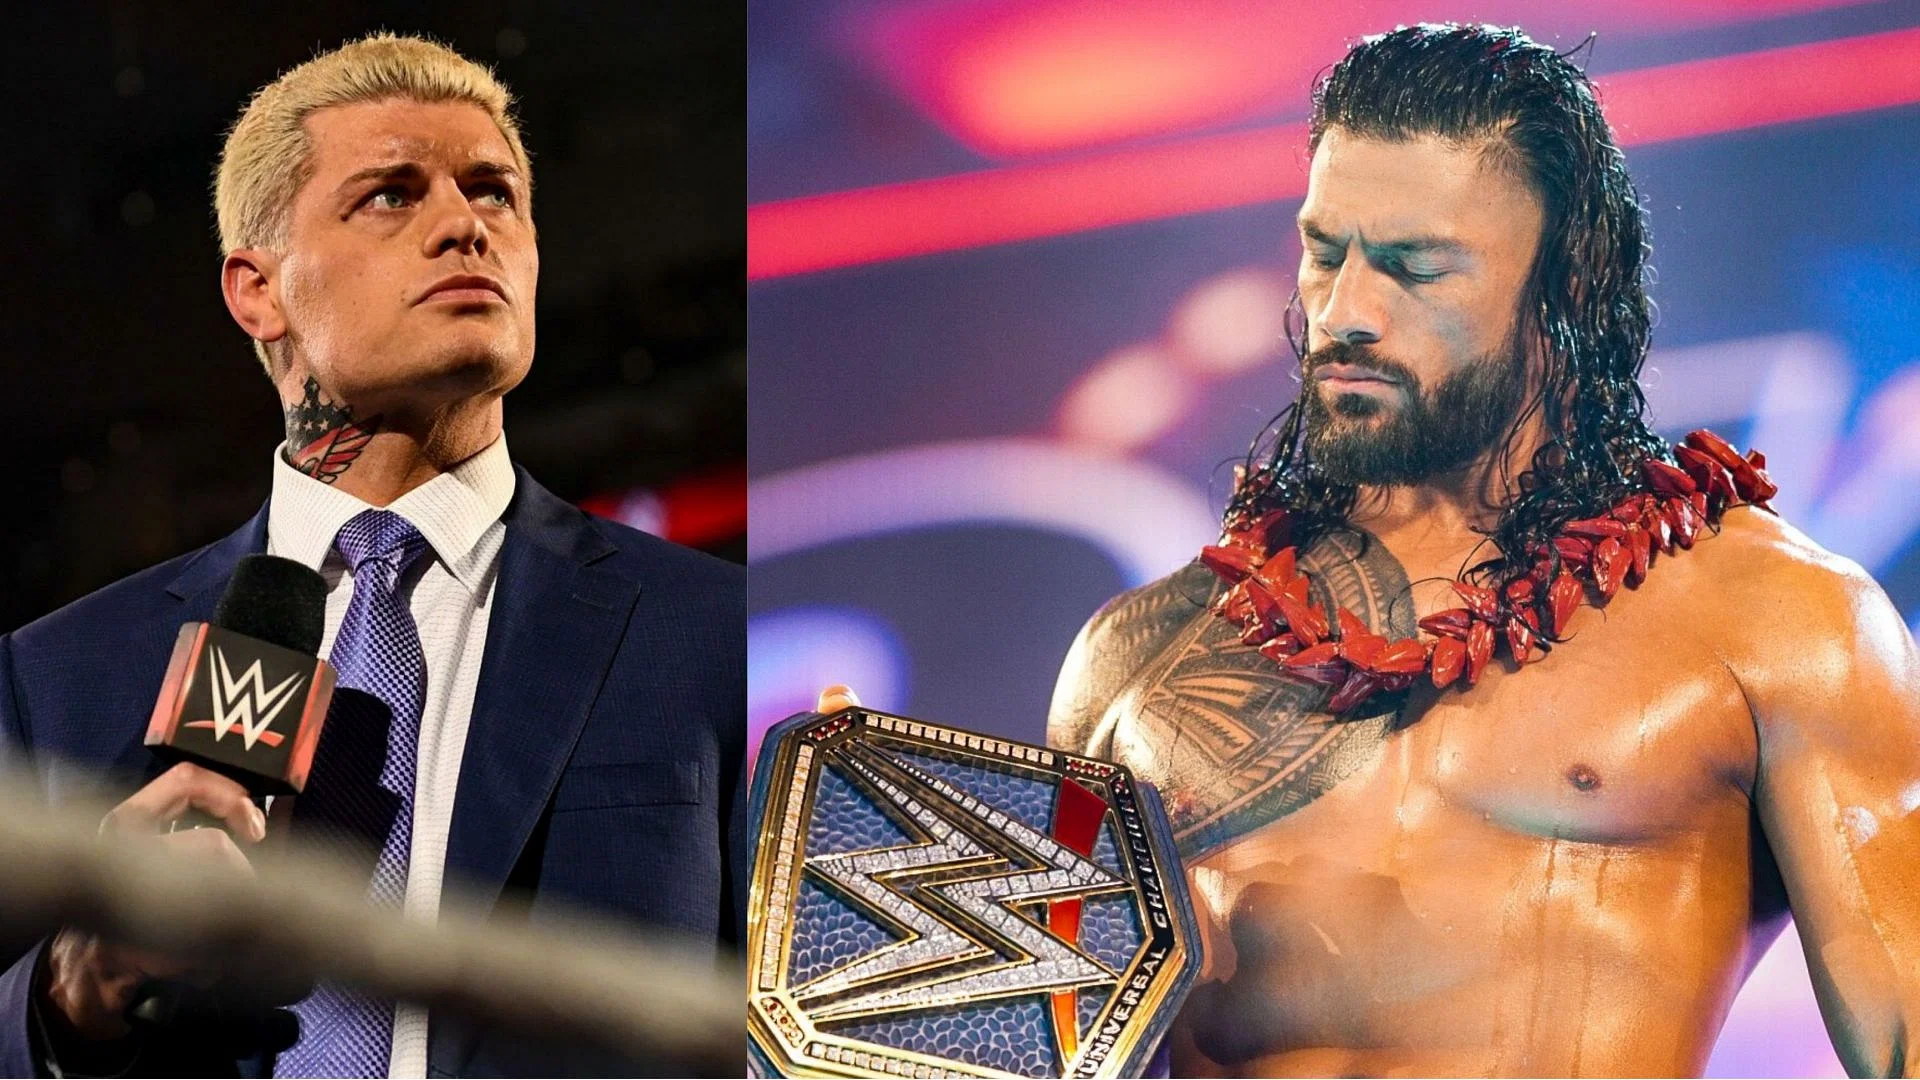 The Unstoppable Force: Roman Reigns vs. Cody Rhodes at WrestleMania XL